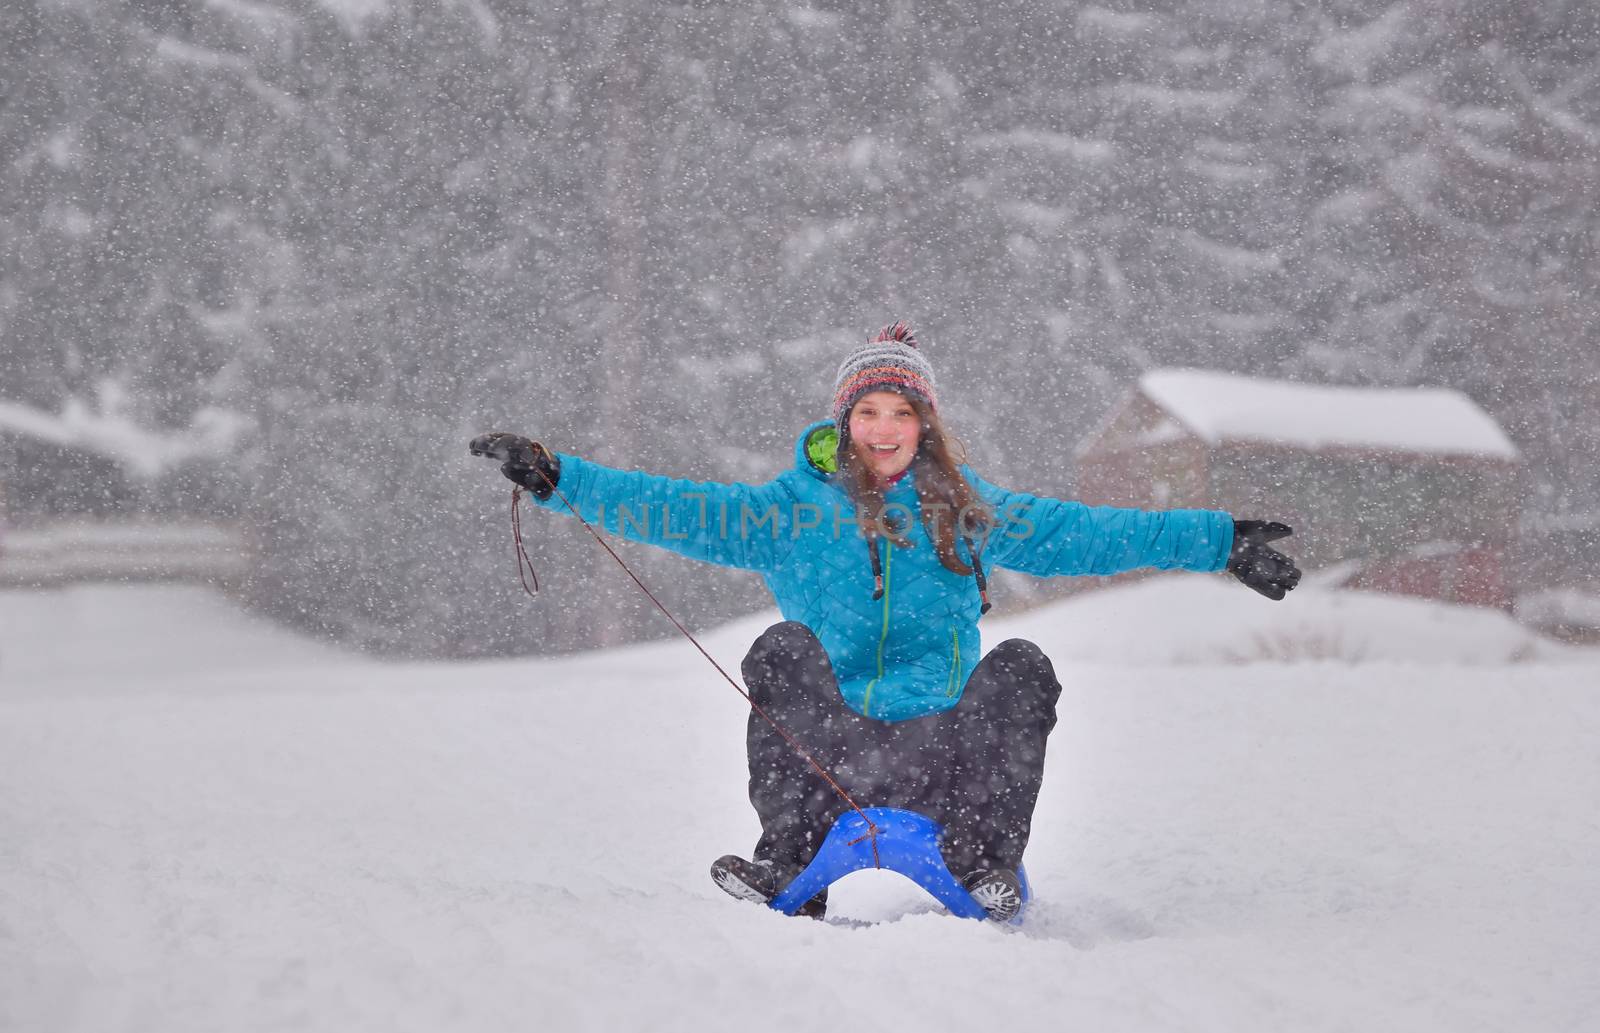 Excited girl sledding on sled while snowing with open arms